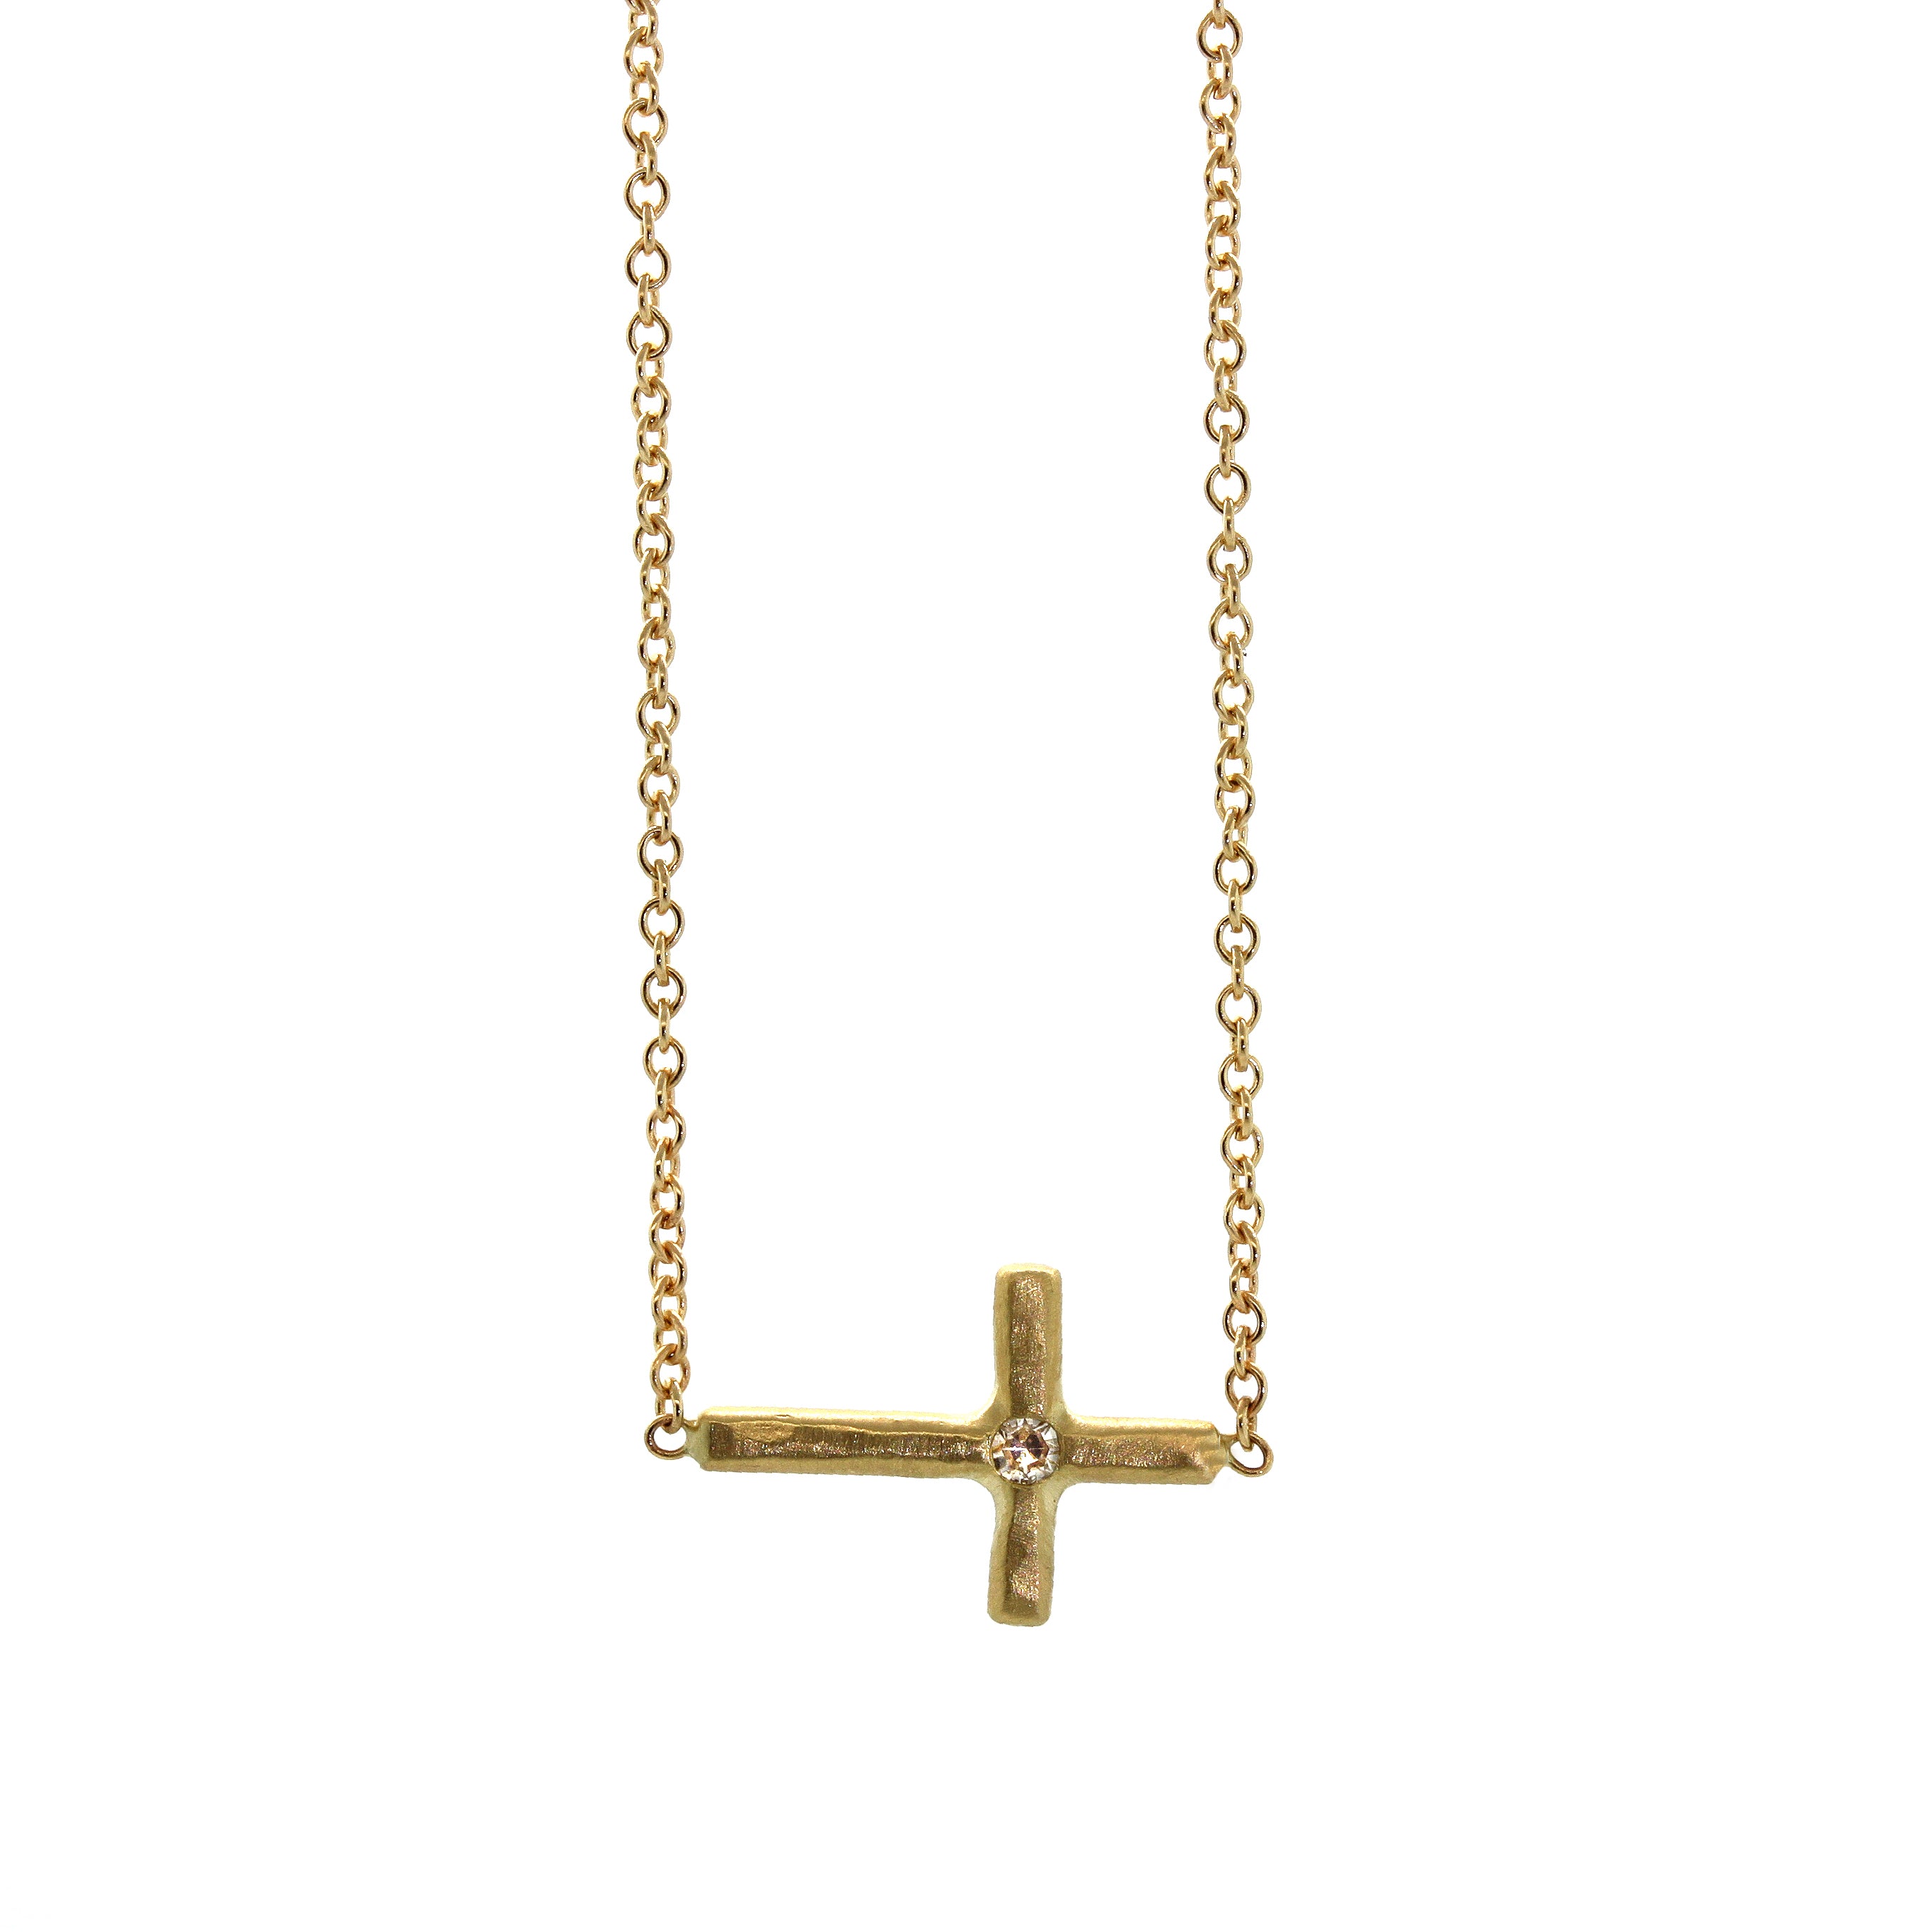 A simple RLD classic, this Sideways Cross & Diamond Necklace features a yellow gold cross with a single inlaid diamond set in the center and soldered sideways into the chain. It was handcrafted at Studio 703 by Rebecca Lankford in Houston, Texas.